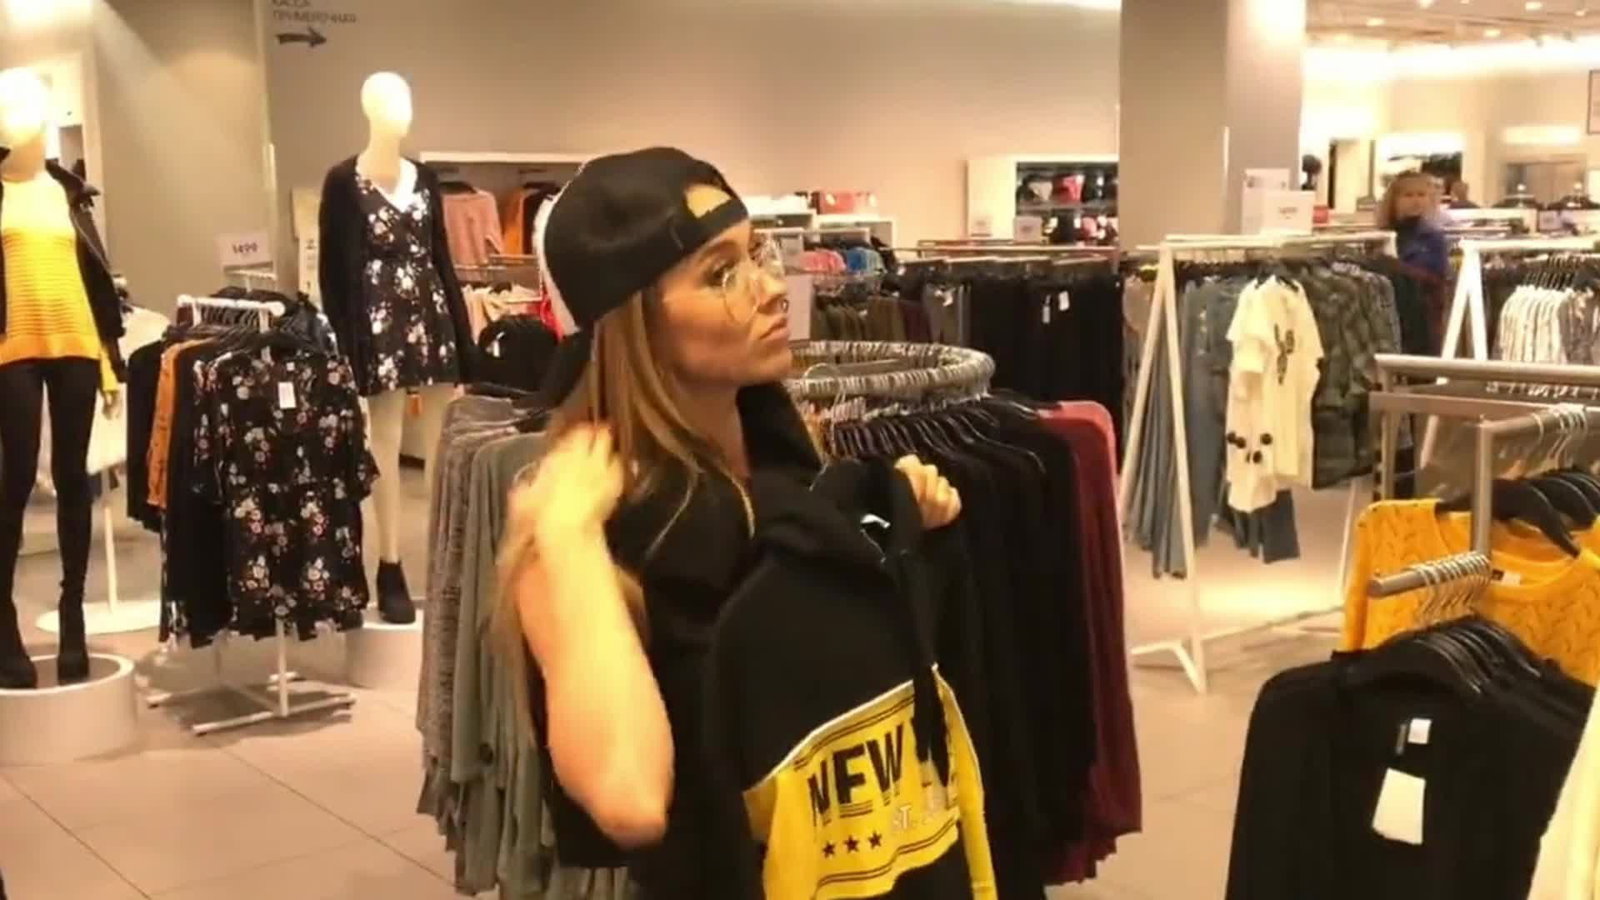 Video by Sabsi with the username @Sabsi-sucks, who is a verified user,  May 4, 2023 at 5:42 AM. The post is about the topic Changing Room and the text says 'If you meet me in a store like this, would you follow me to the changing room?'